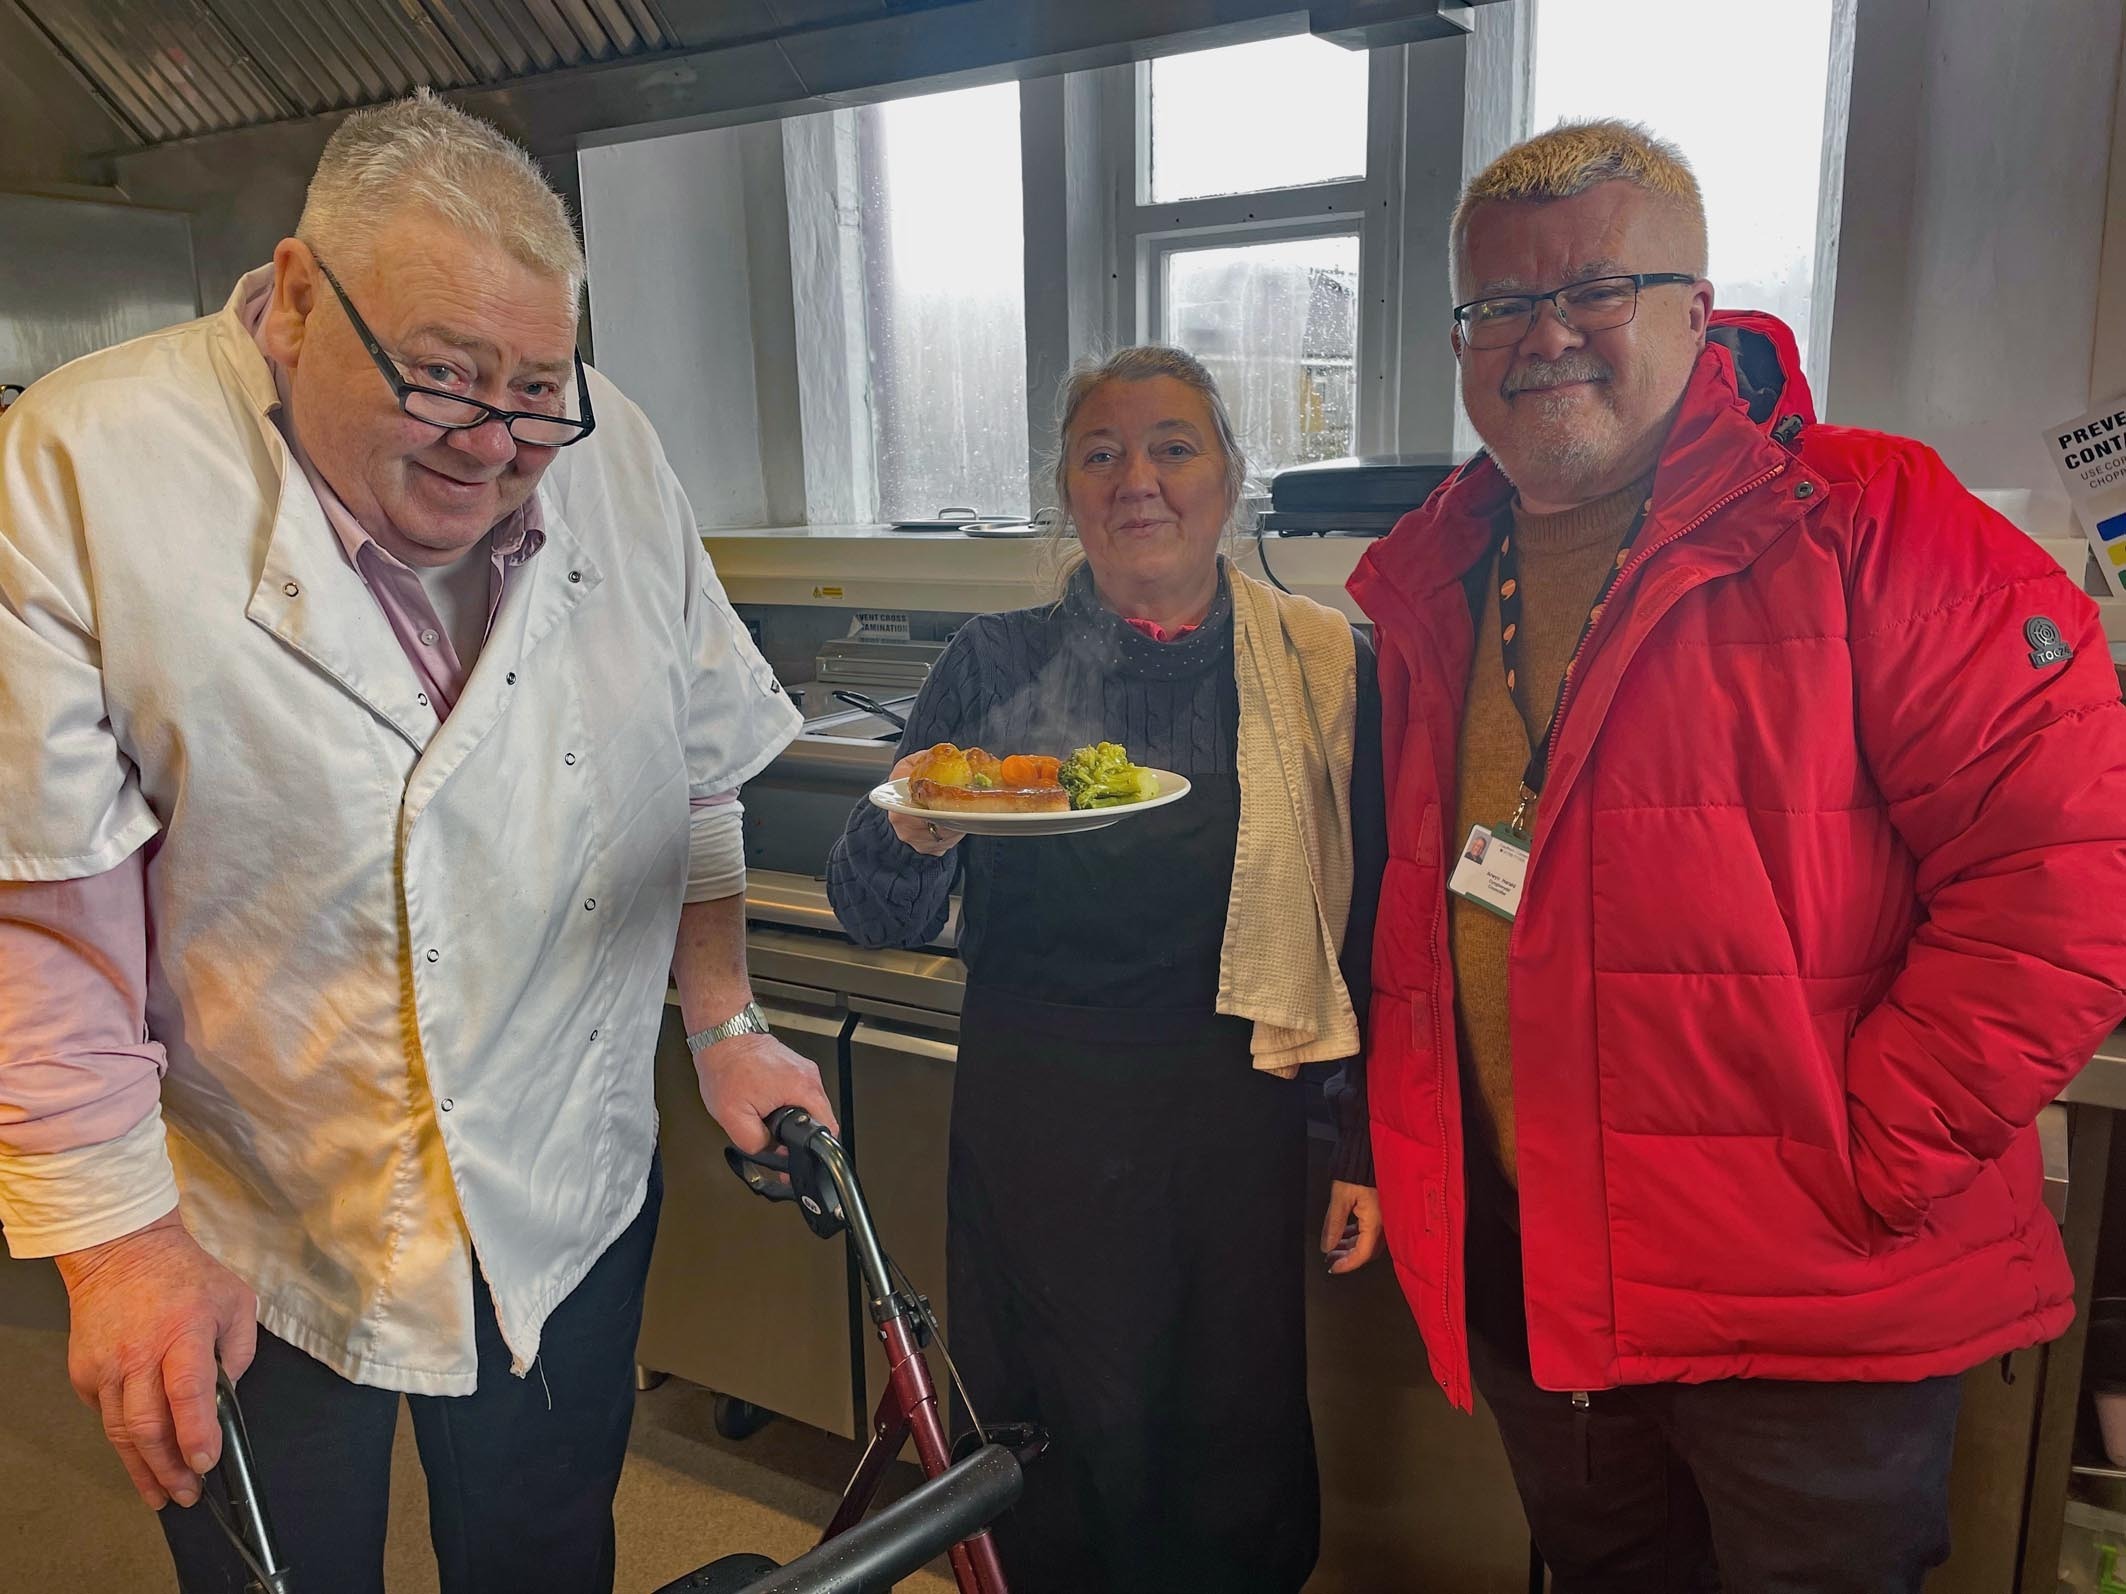 Pictured: The chefs busy are in the kitchen at Canolfan y Fron during a visit by County Councillor Arwyn \Herald\ Roberts (Image: Ffion Clwyd Edwards)